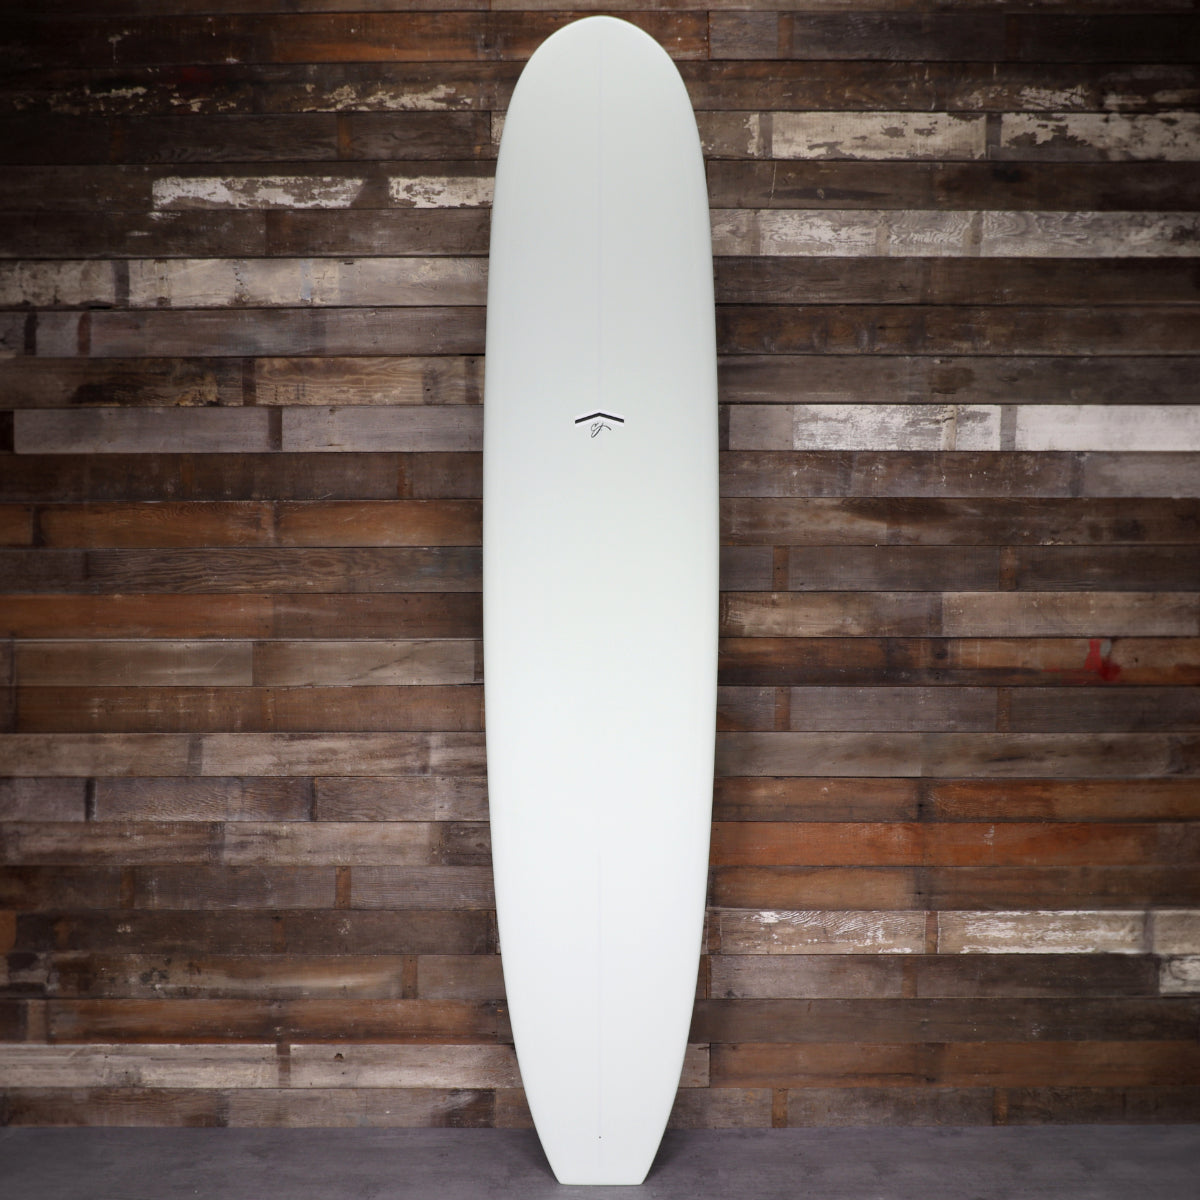 CJ Nelson Designs The Sprout Thunderbolt Silver 9'6 x 23 ½ x 3 